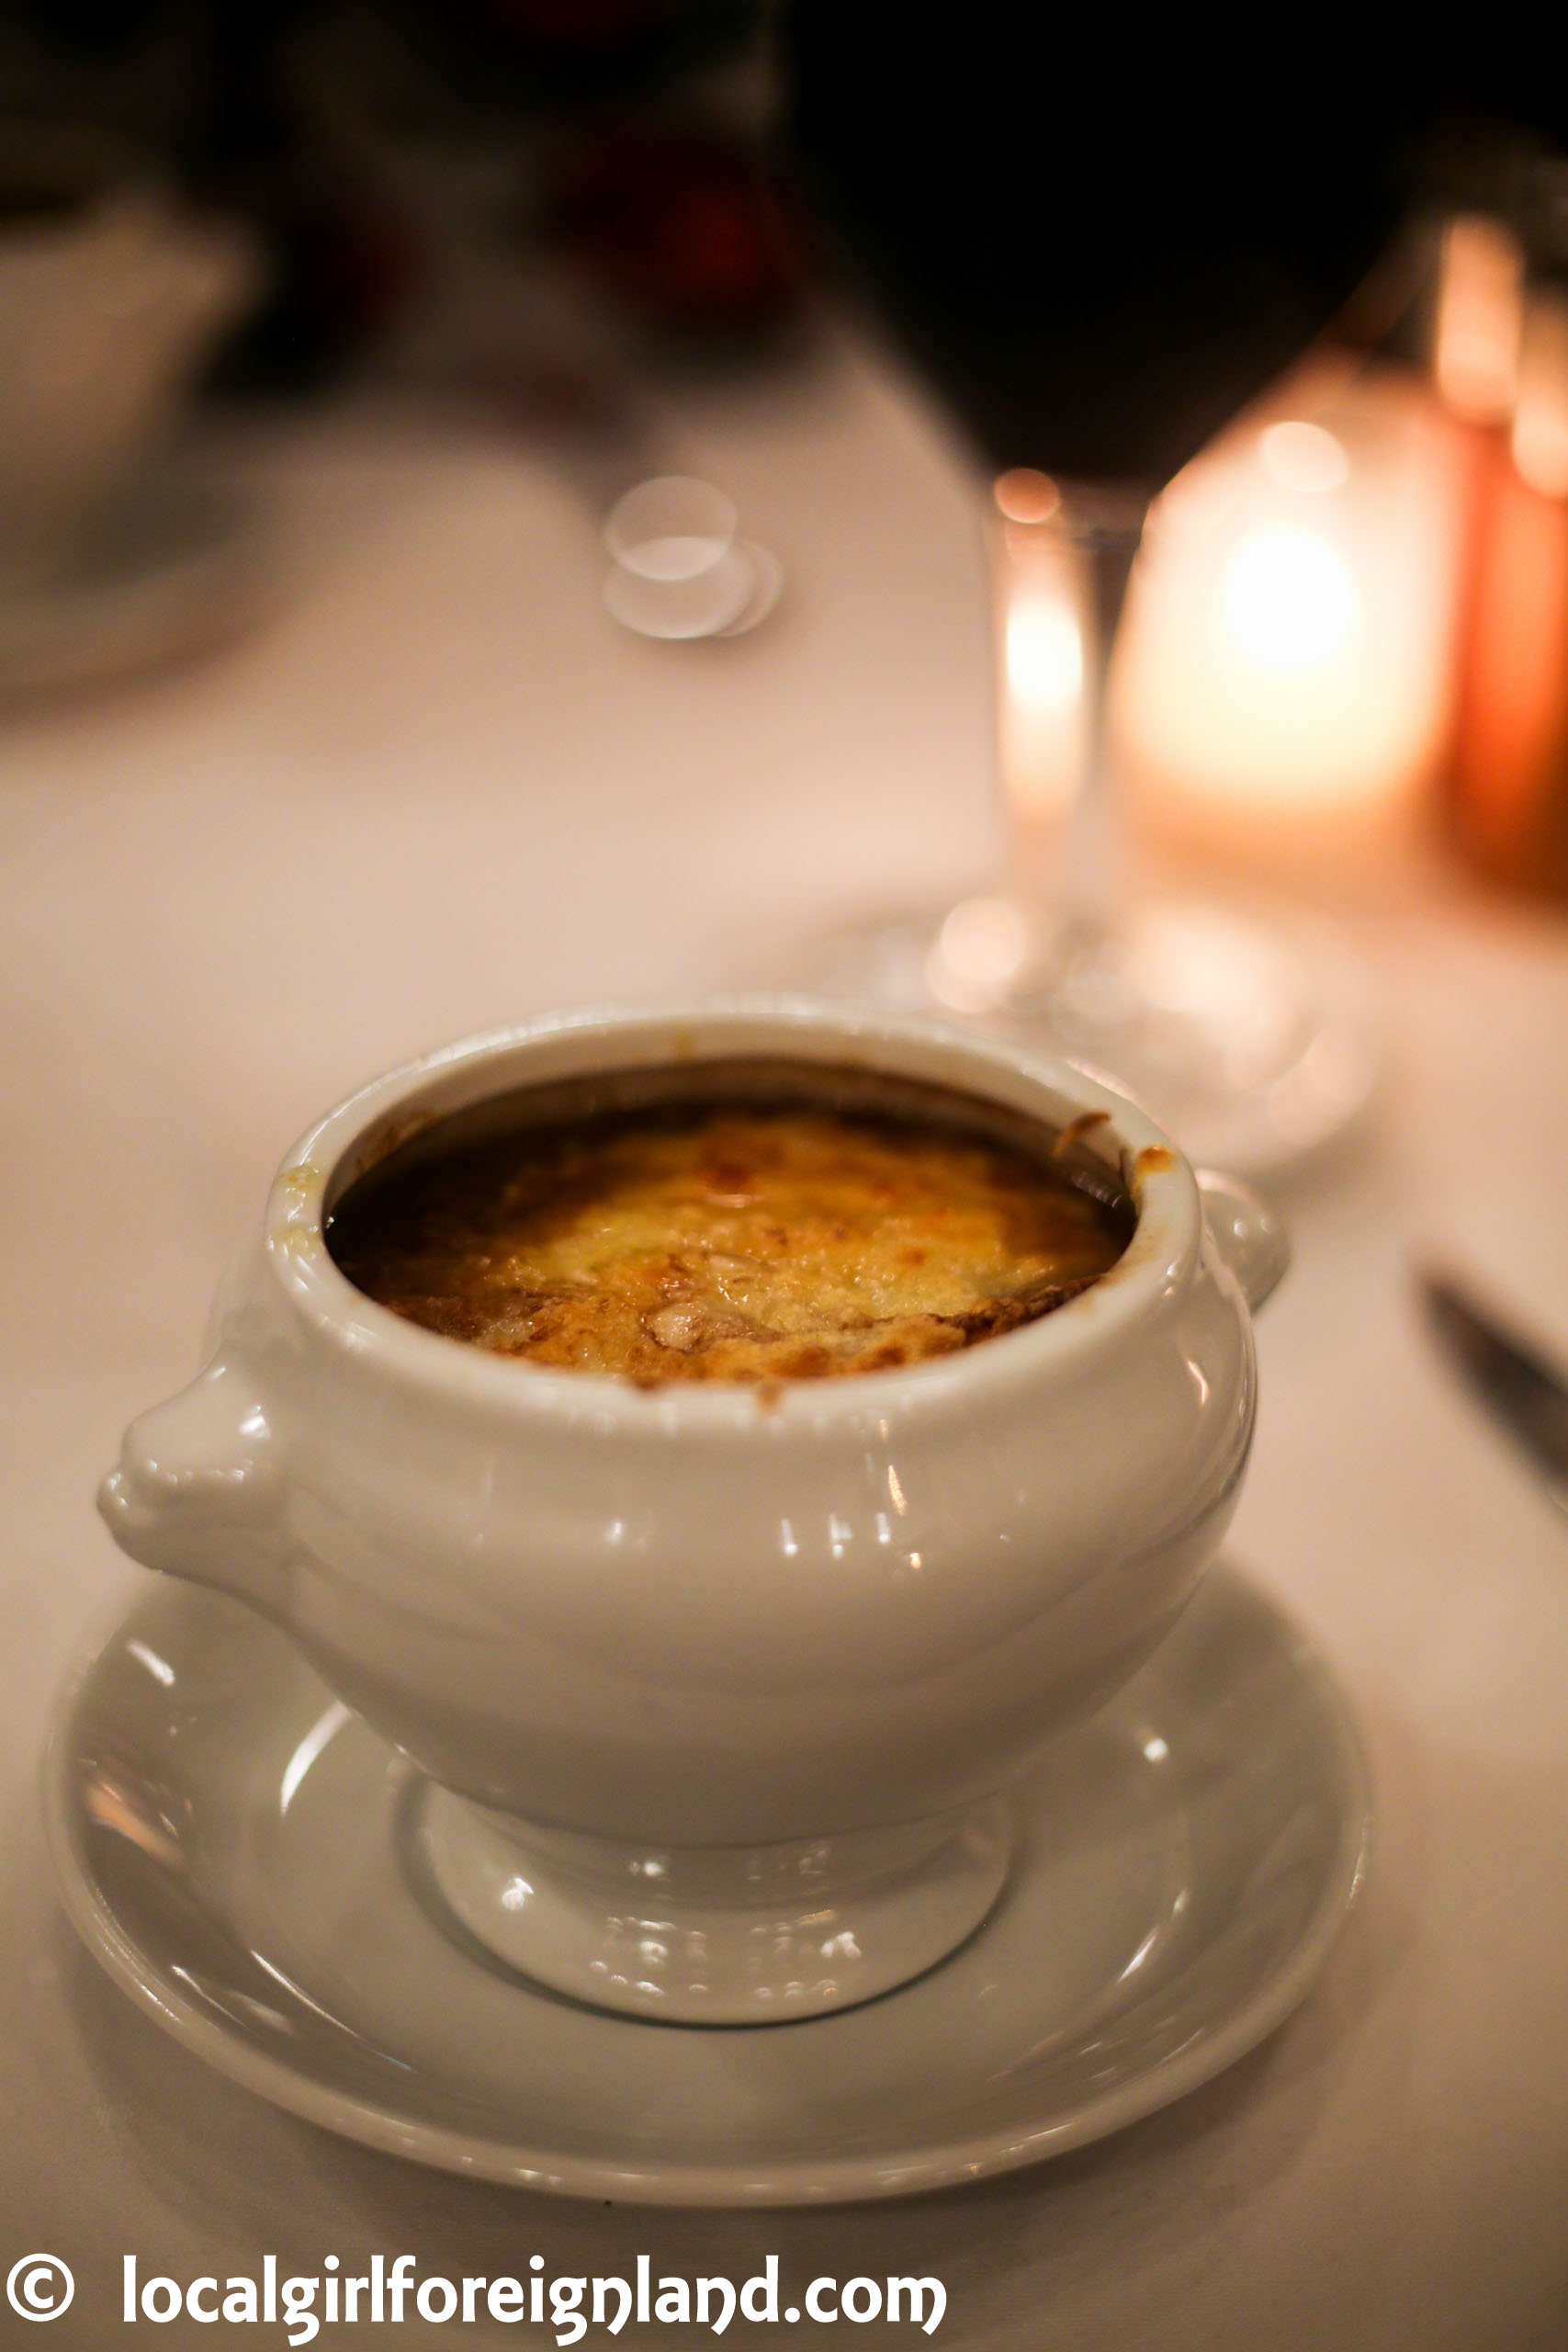 French onion soup - dish by Imperial Cafe, Prague